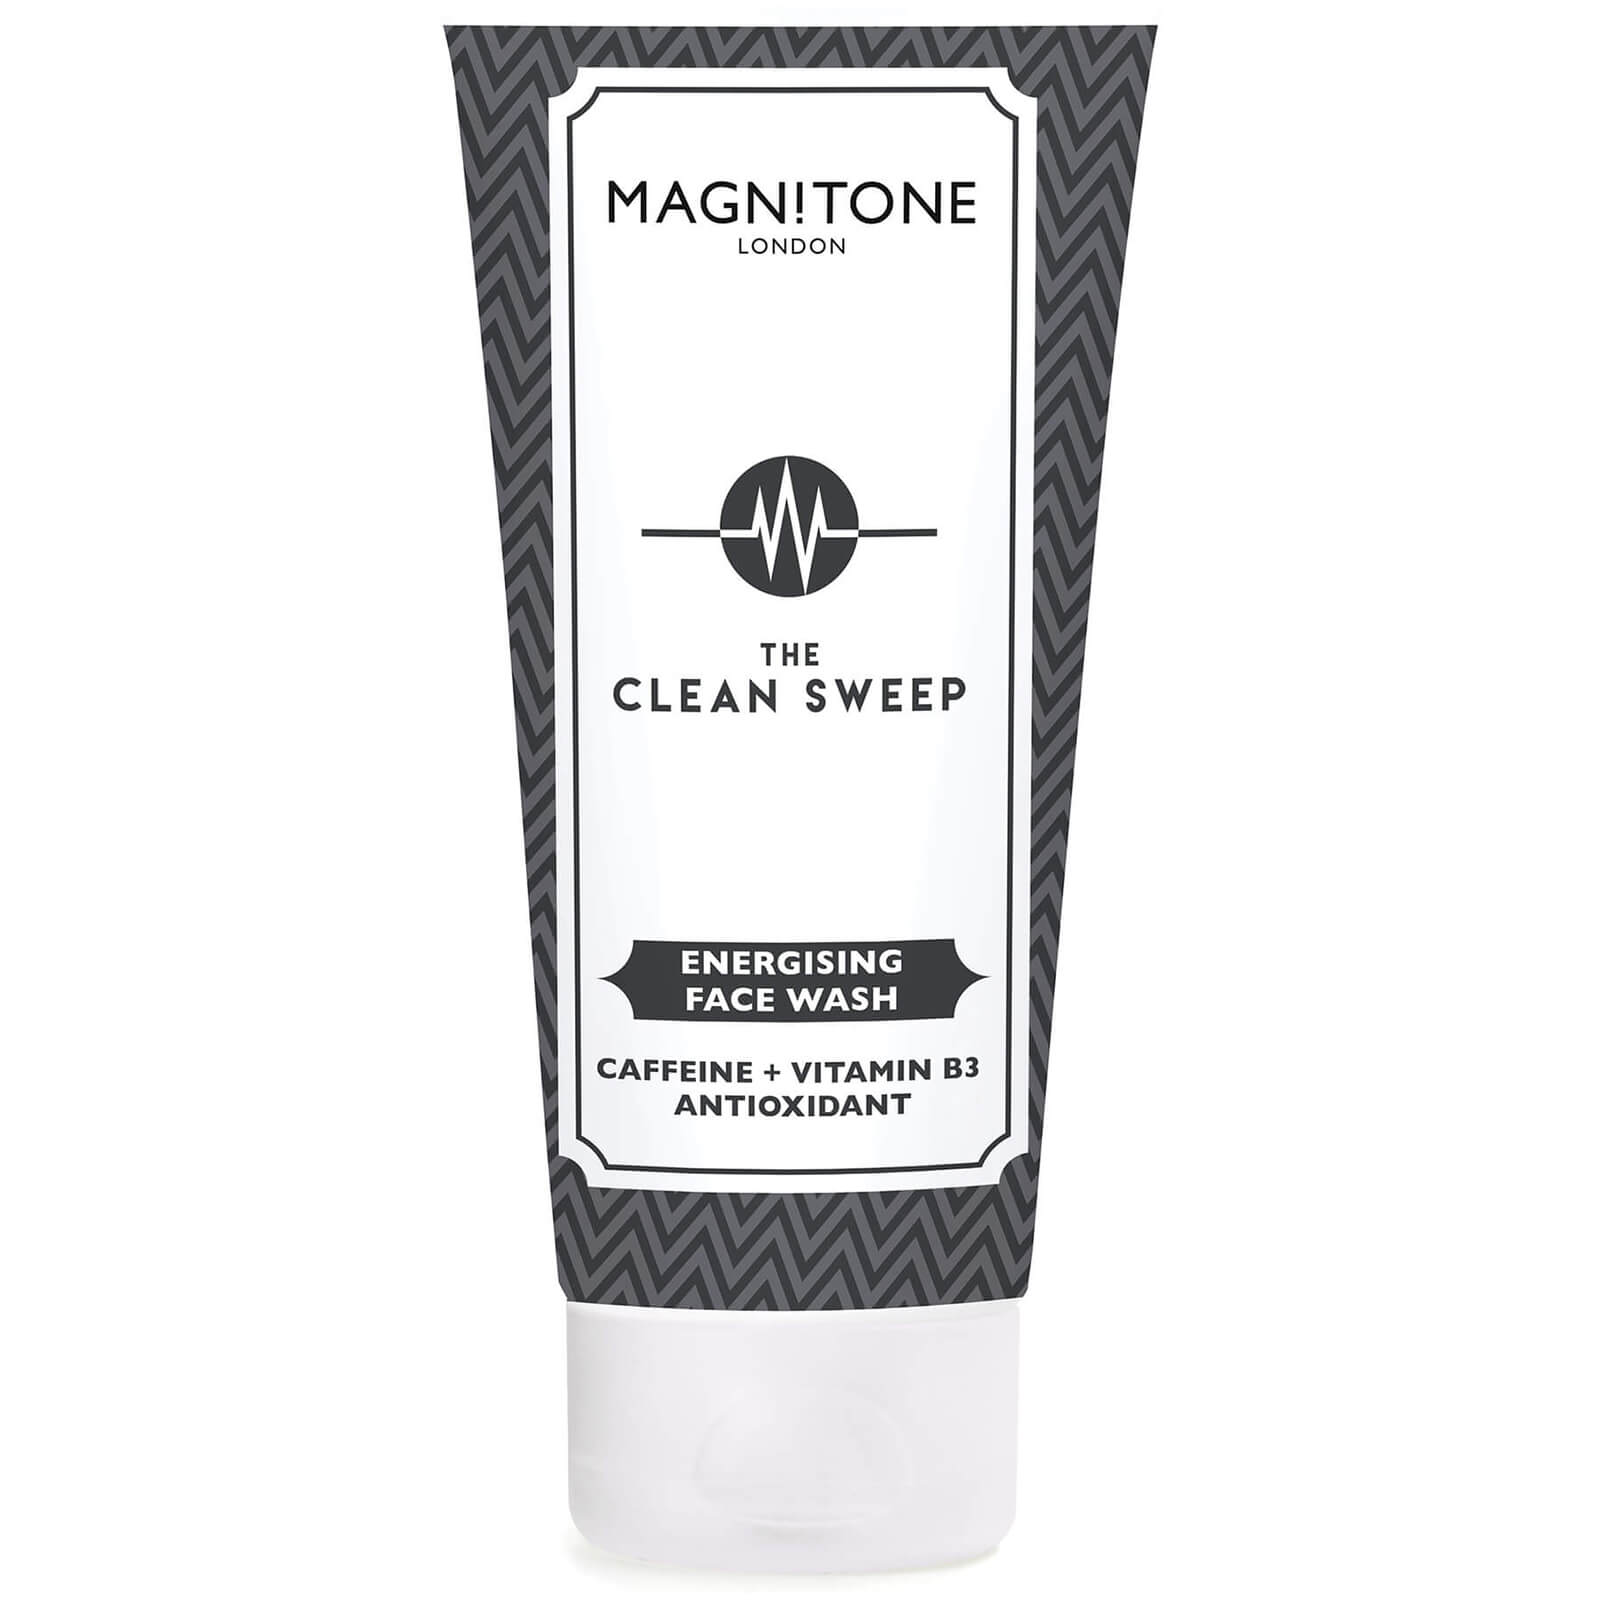 MAGNITONE London The Clean Sweep Energising Face Wash 150ml